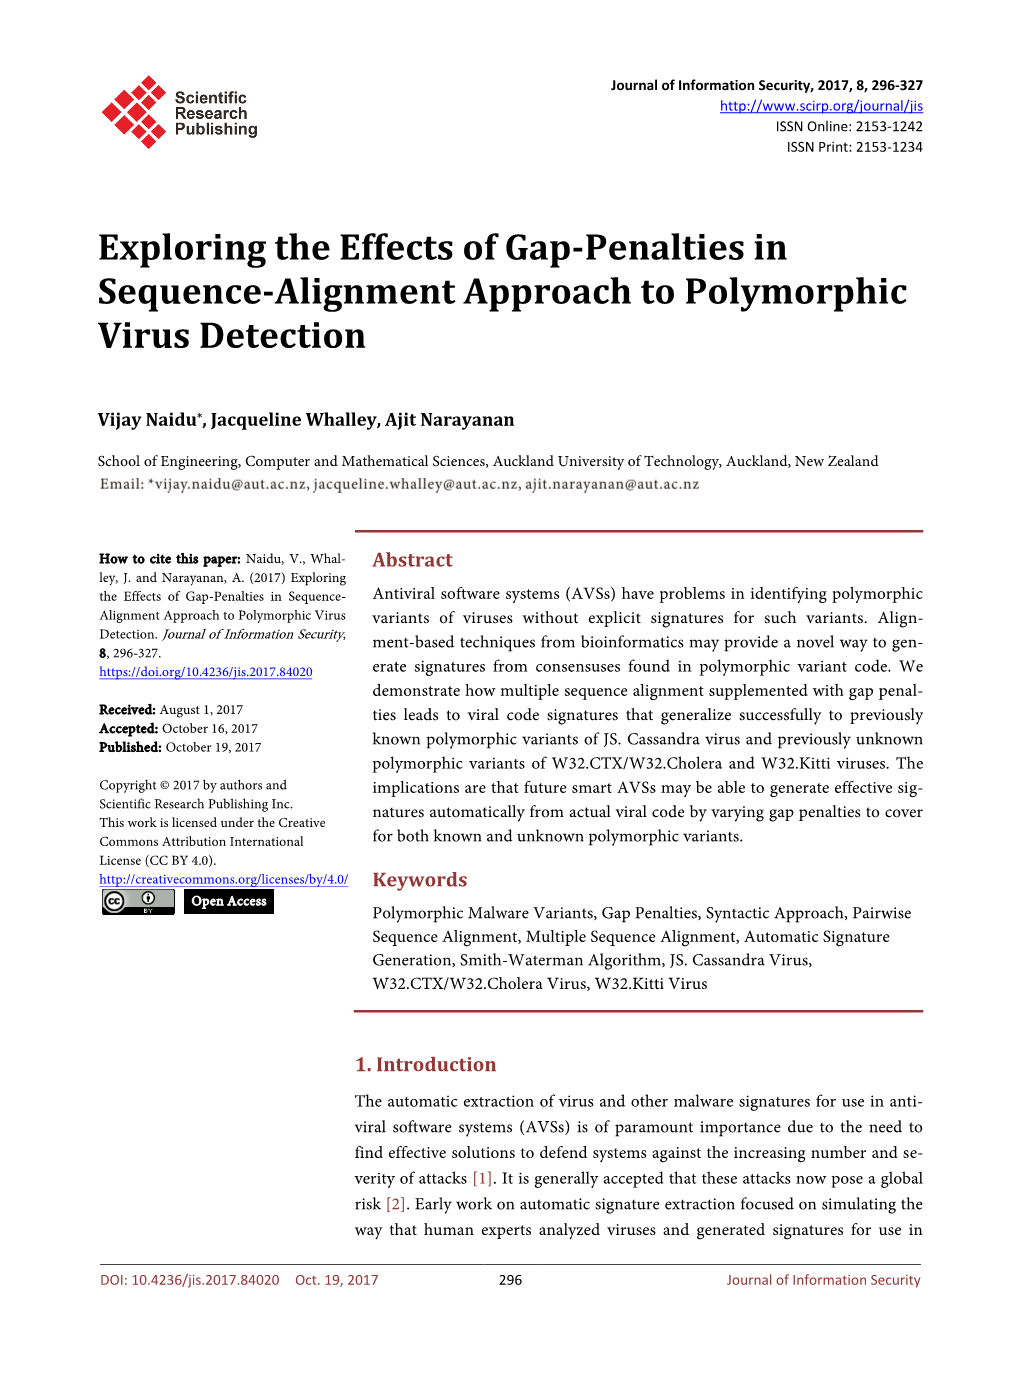 Exploring the Effects of Gap-Penalties in Sequence-Alignment Approach to Polymorphic Virus Detection